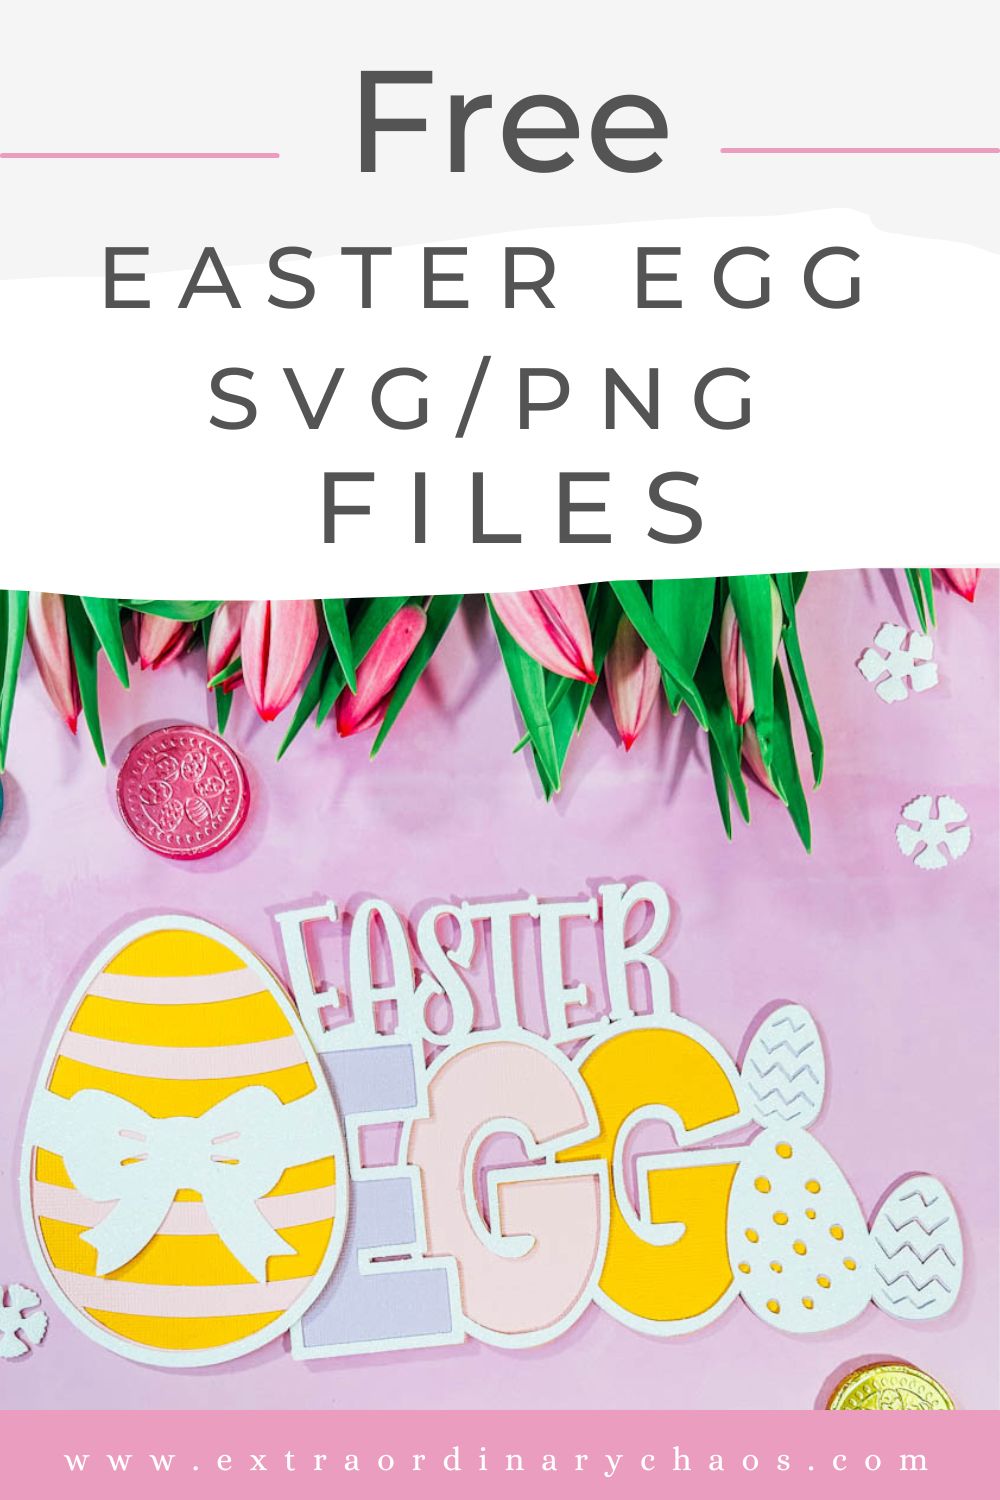 Free Easter Egg SVG file for Cricut and Silhouette forEaster crafts and scrapbooking